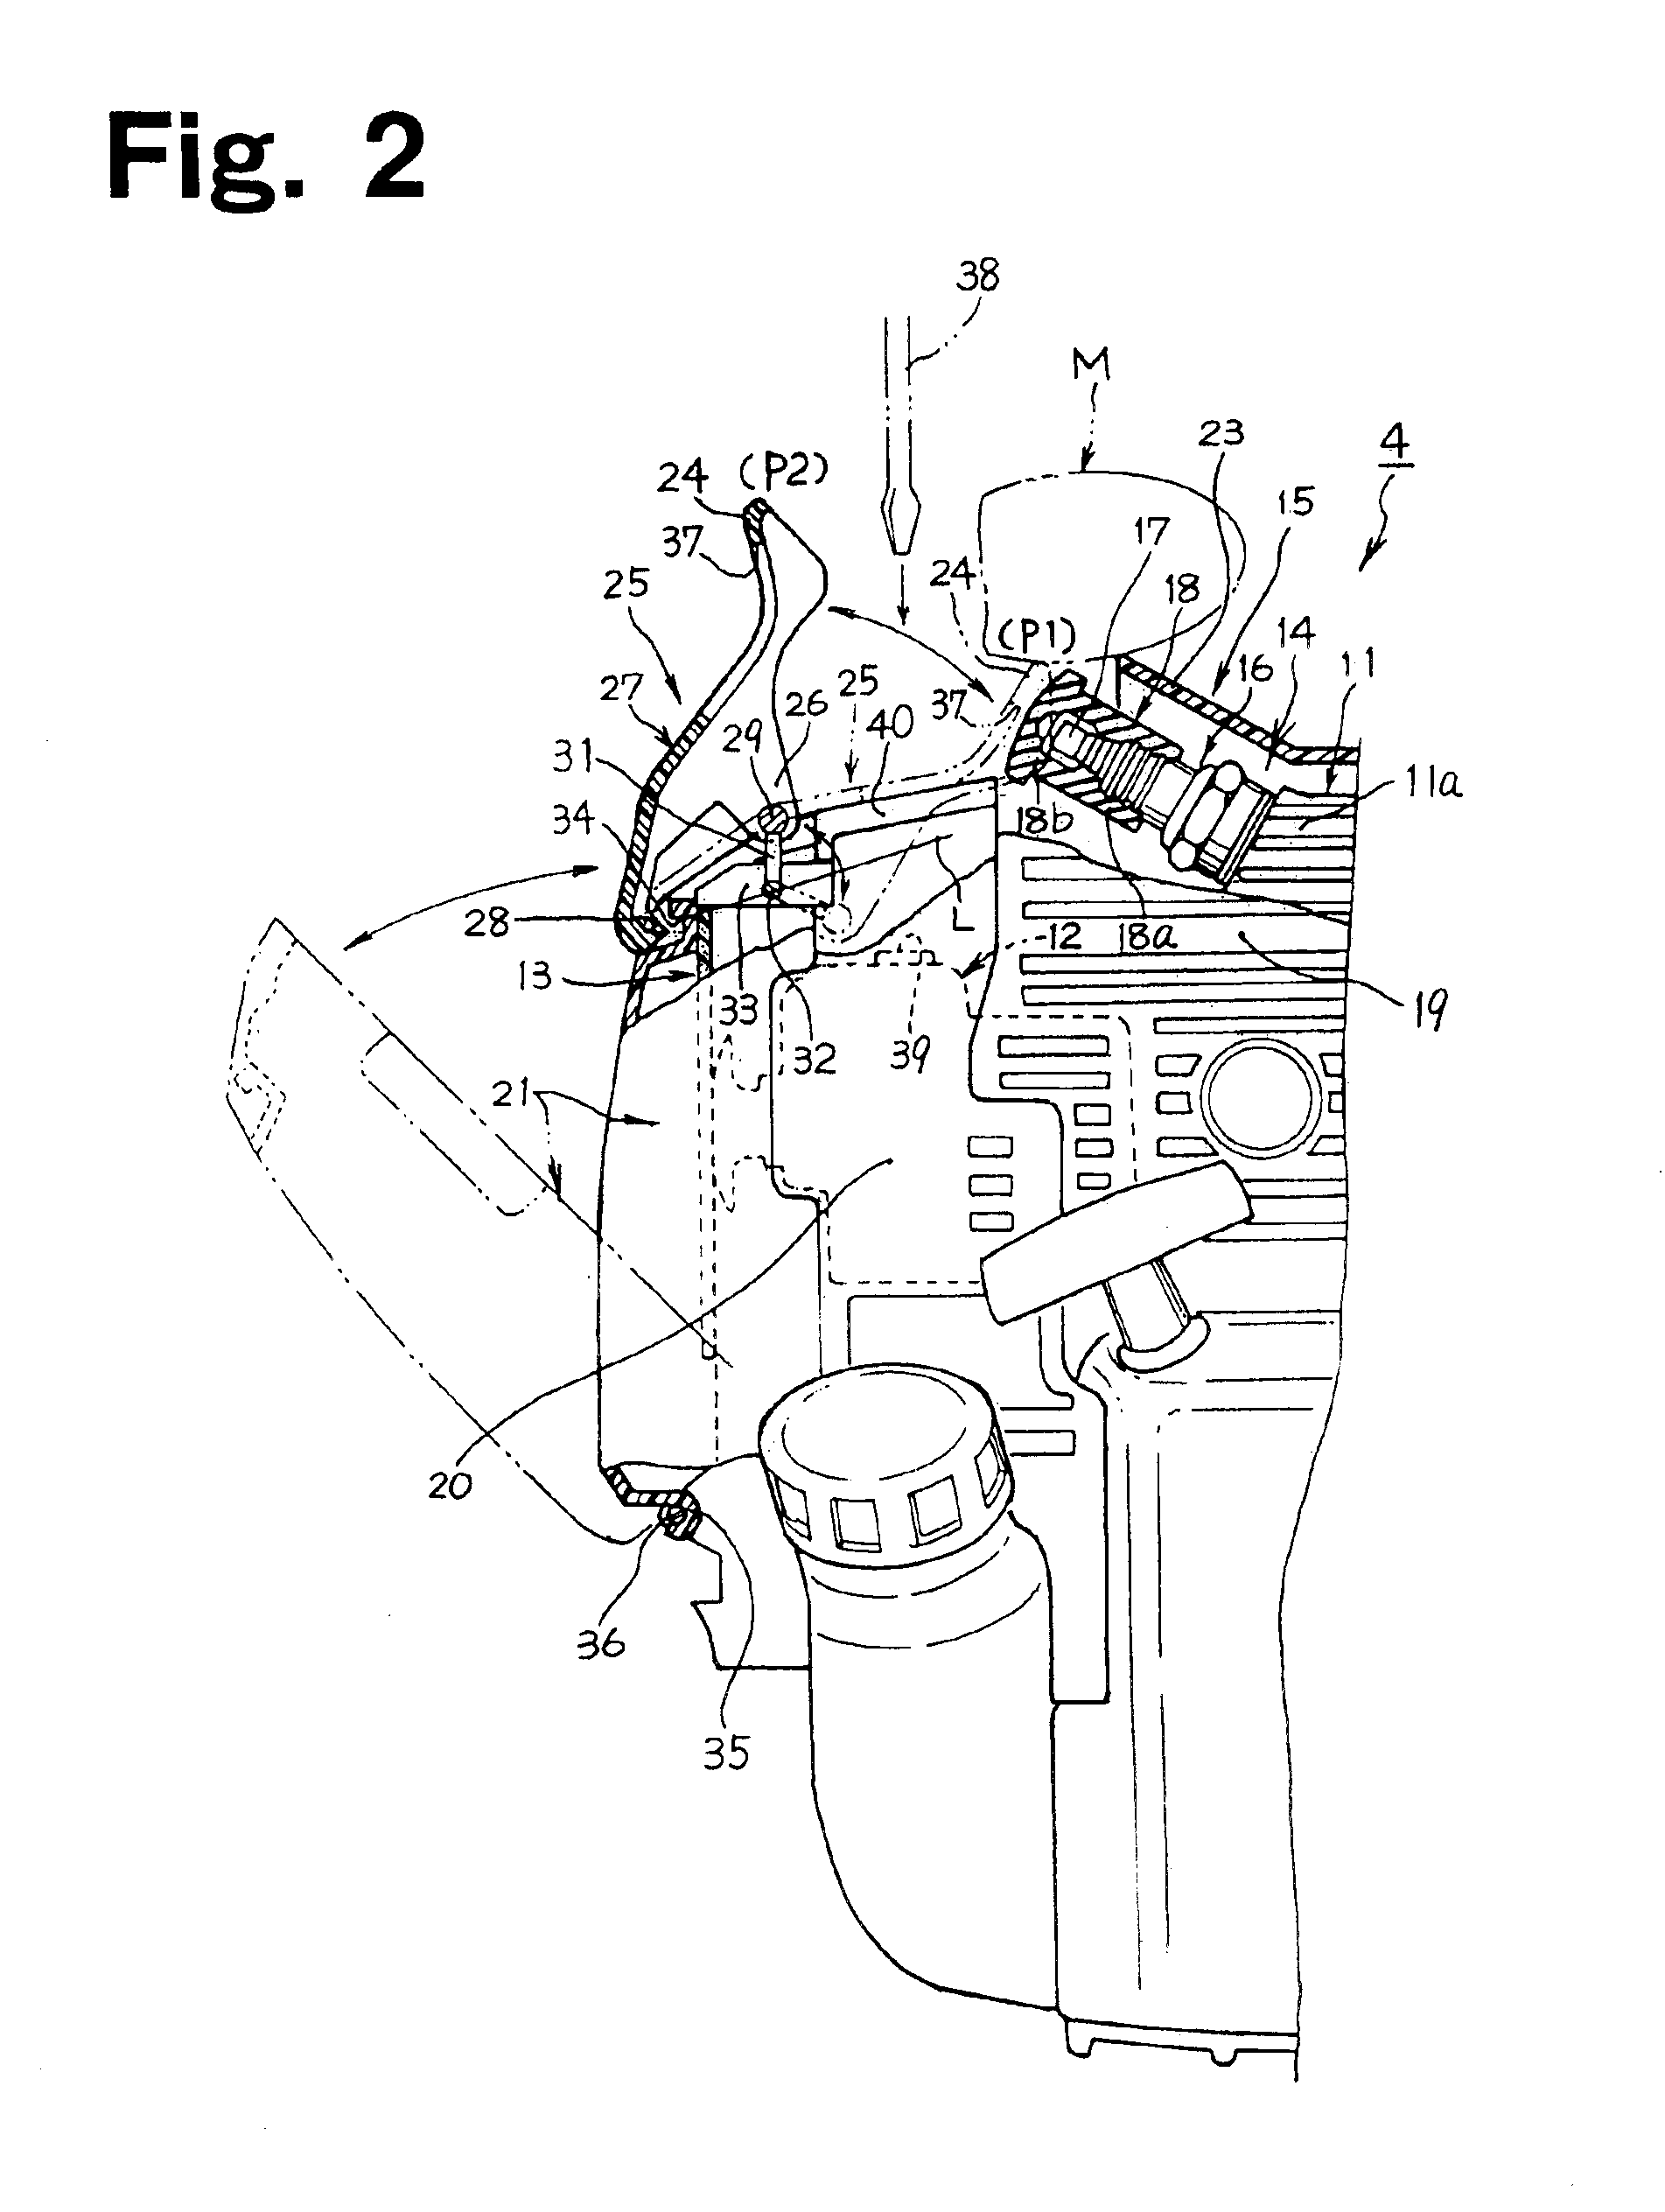 Power working machine with internal combustion engine having spark plug